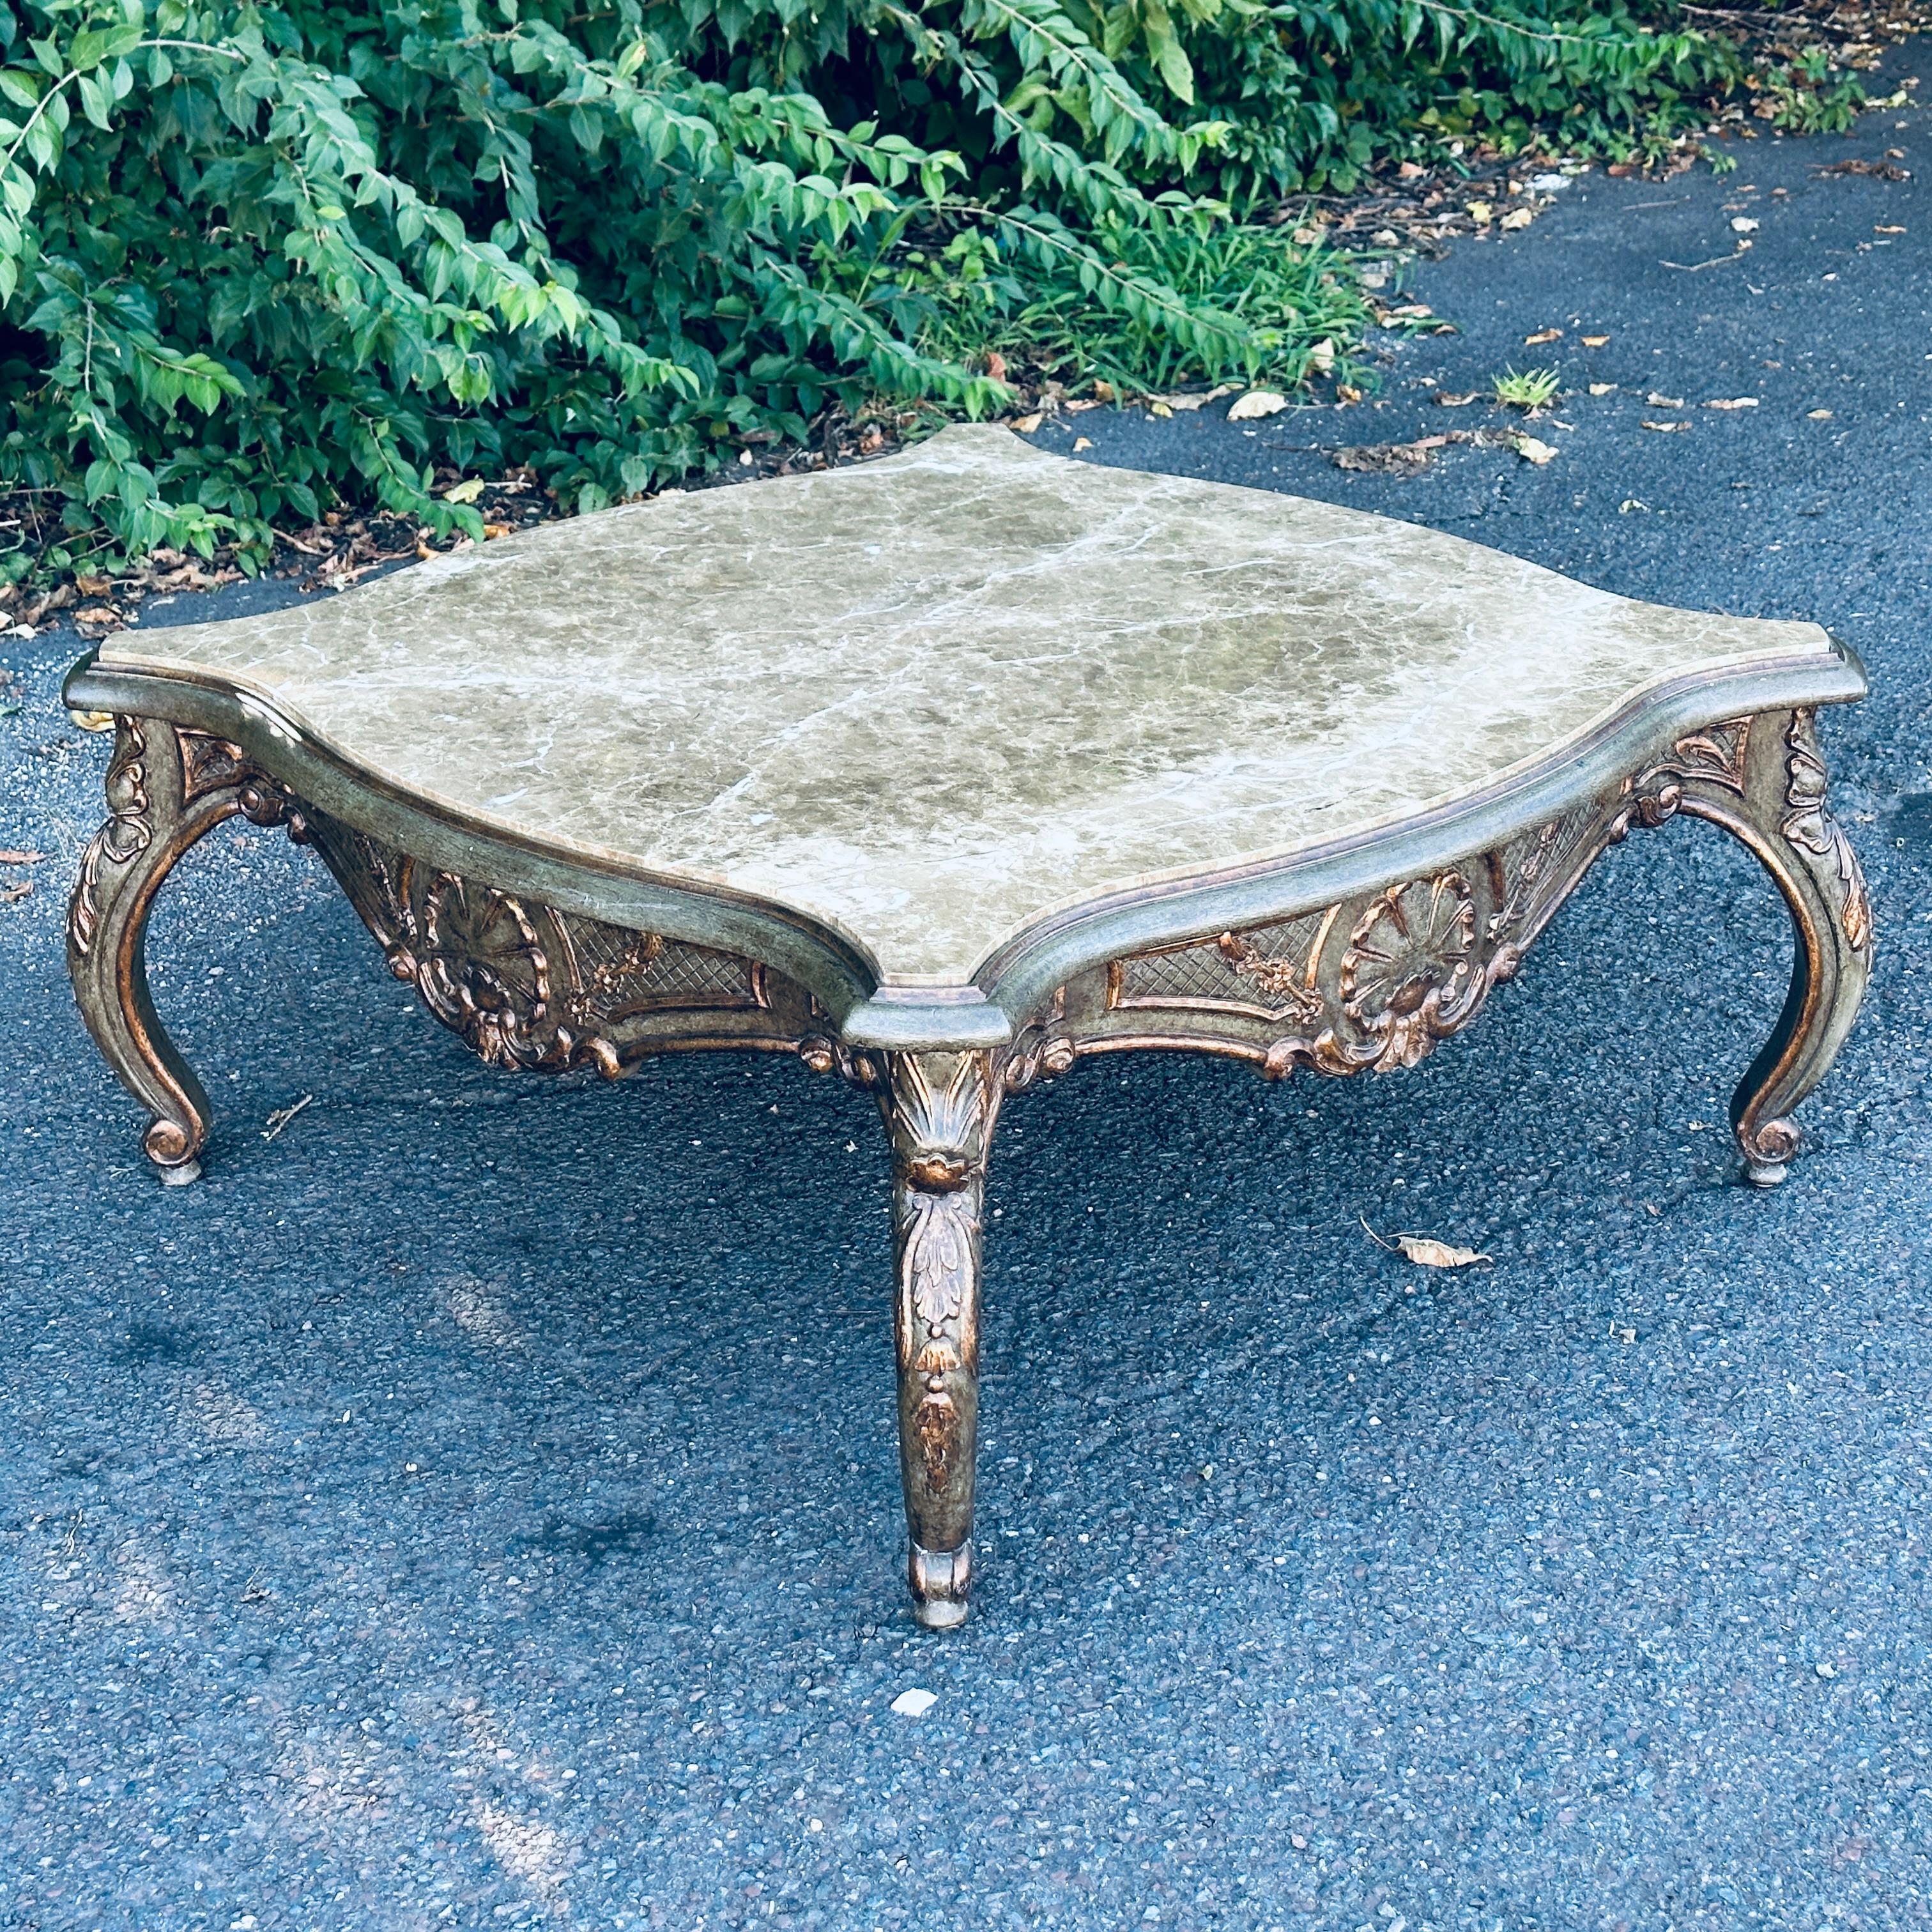 Nancy Corzine French Marble Top Coffee Table
Model 5029-42 Agean Cocktail Table